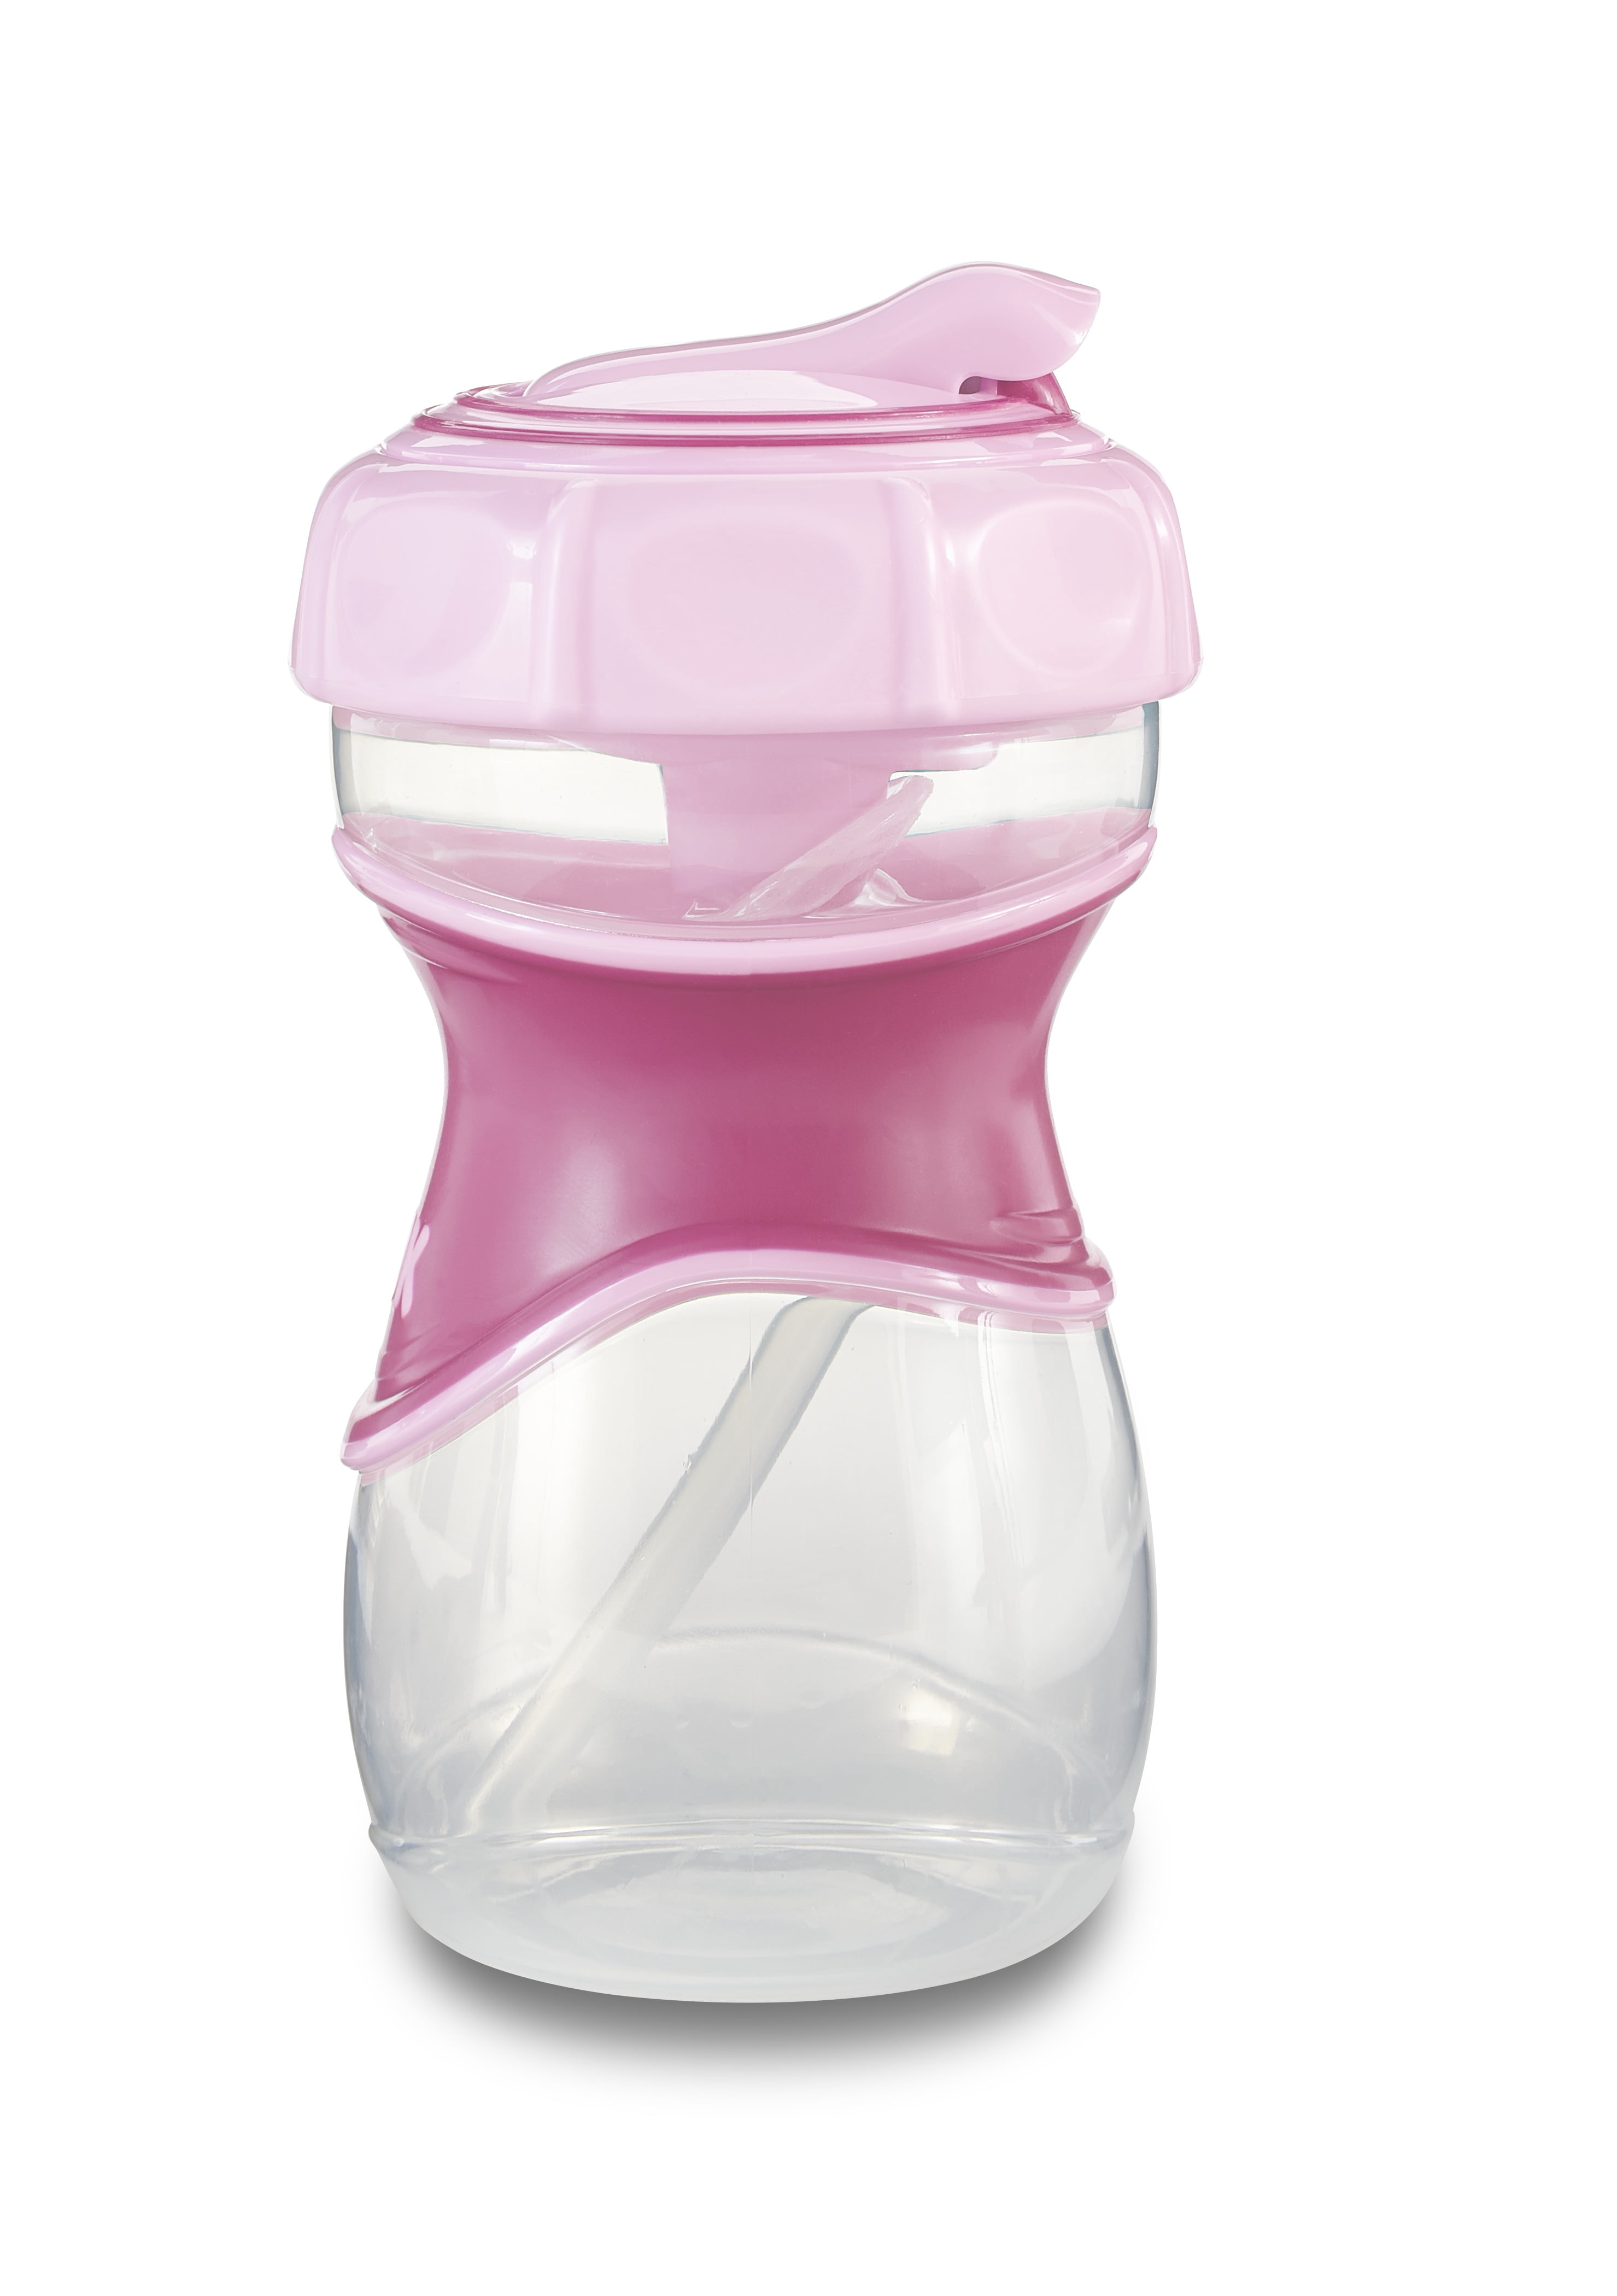 NUK for Nature Everlast Weighted Straw Cup - Pink - 10oz